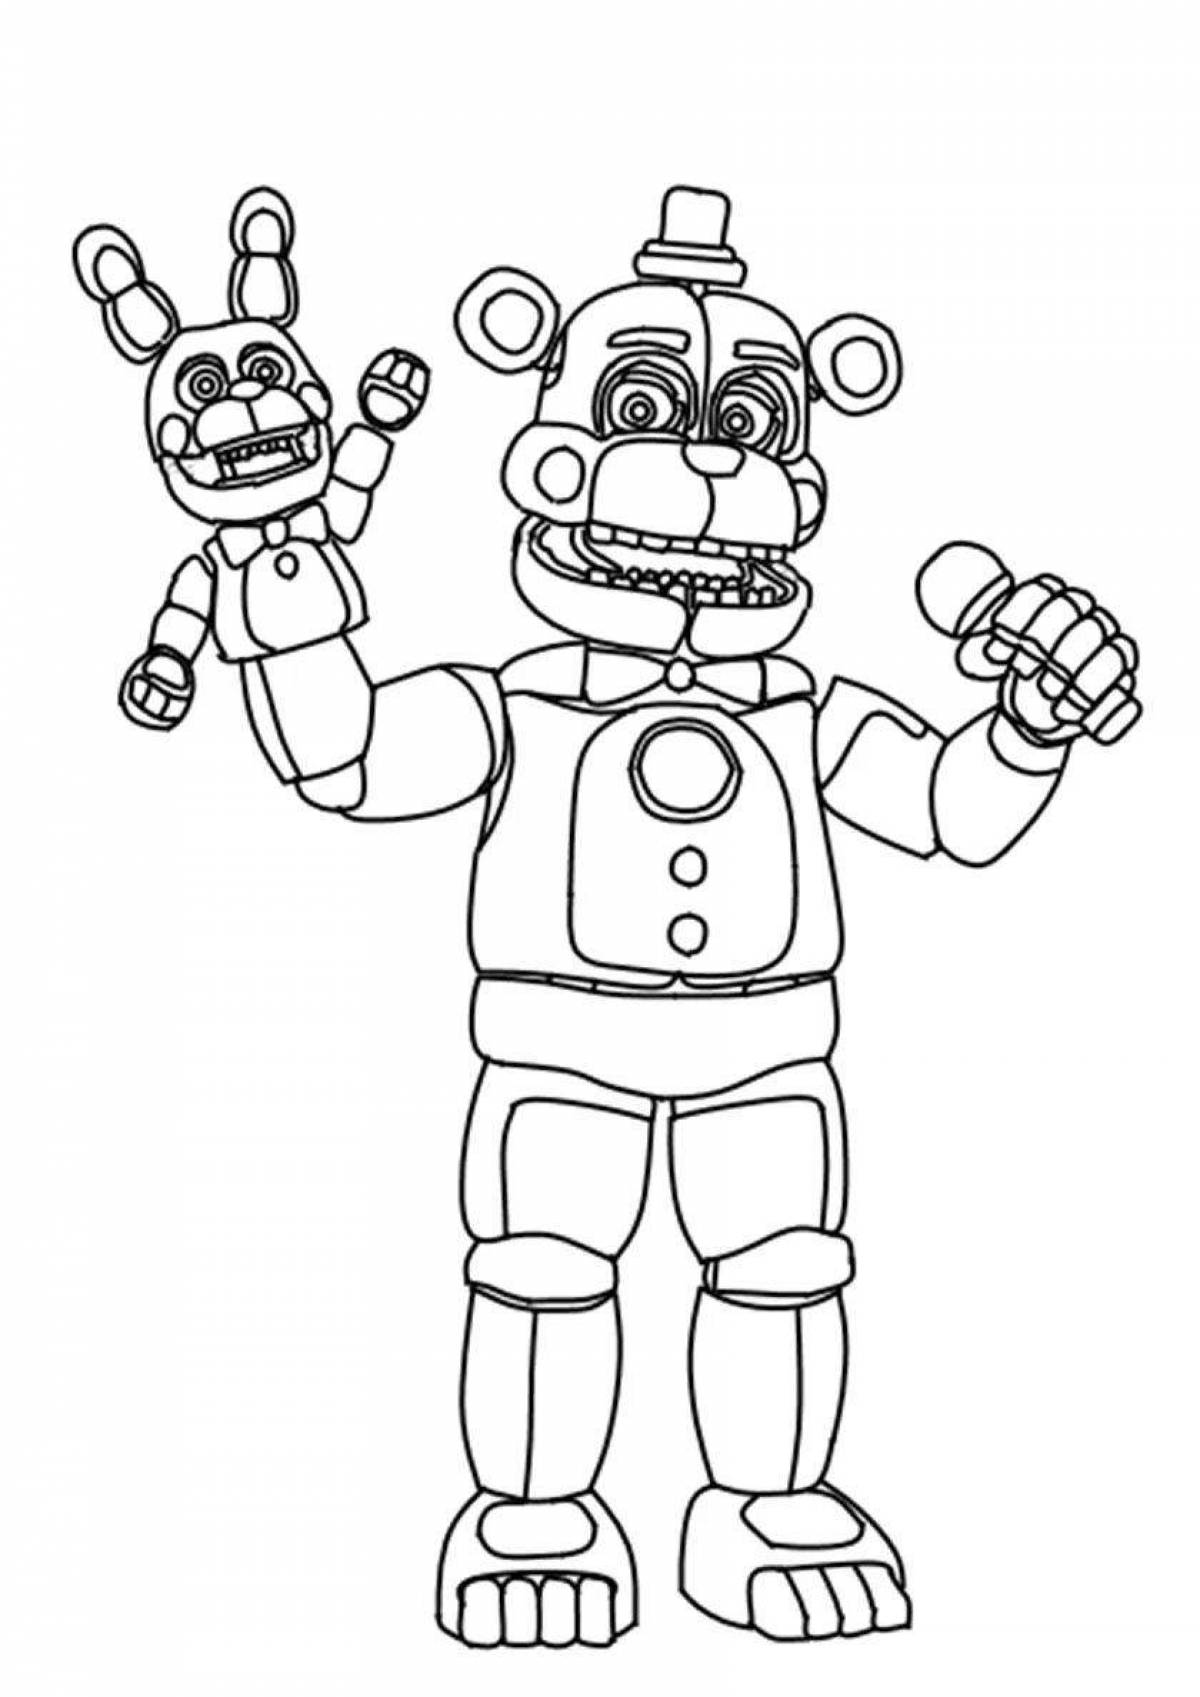 Coloring glowing melted freddy